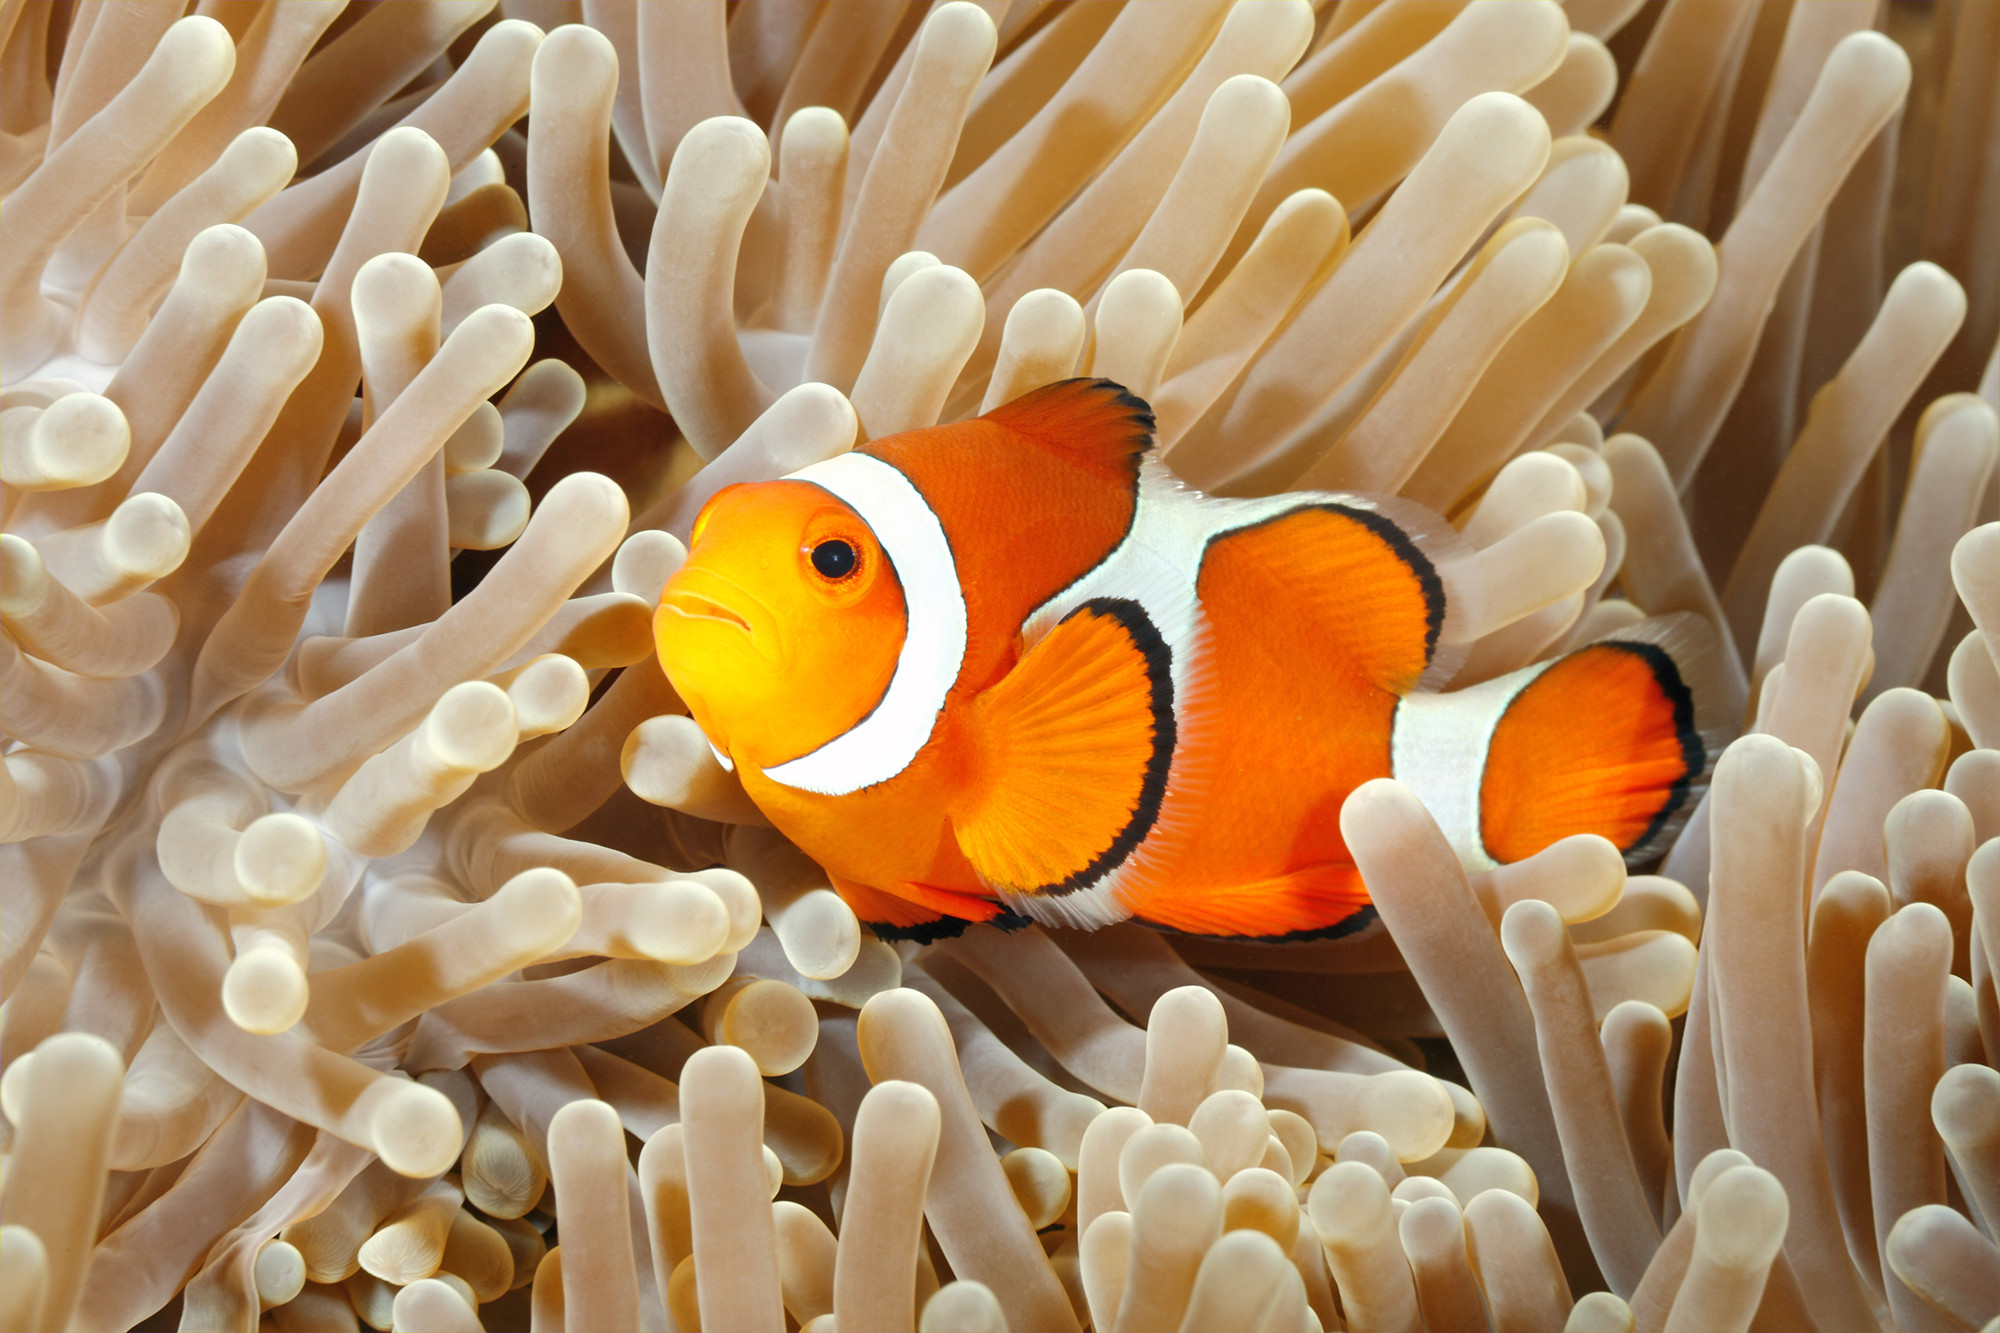 Finding Nemo' is a hermaphroditic lie, says science